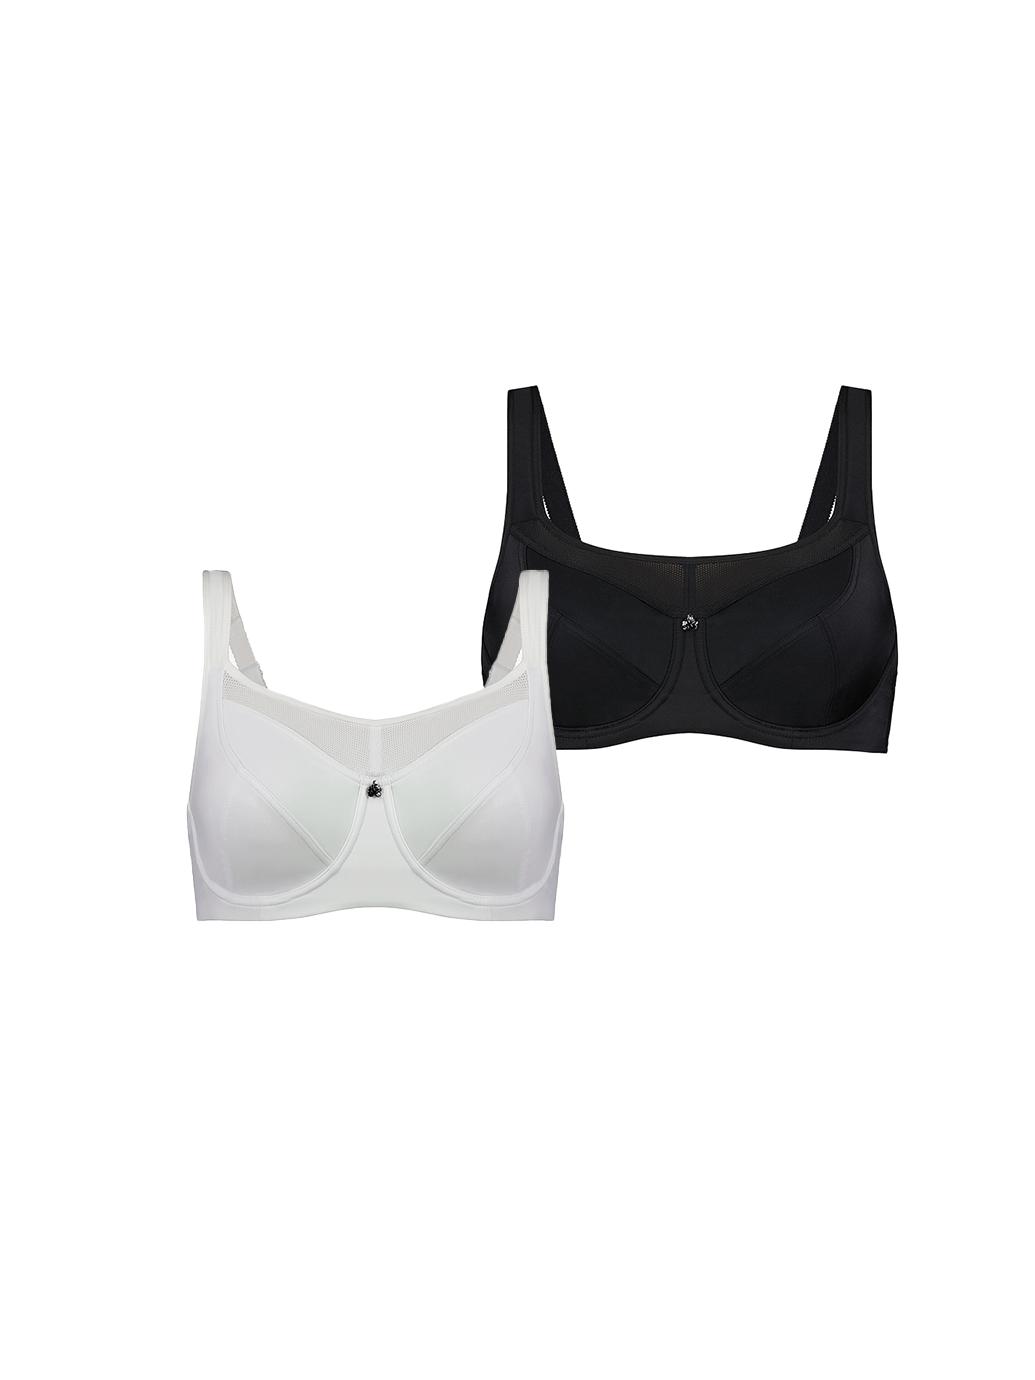 Active Bras (2 Pack) - Black and White